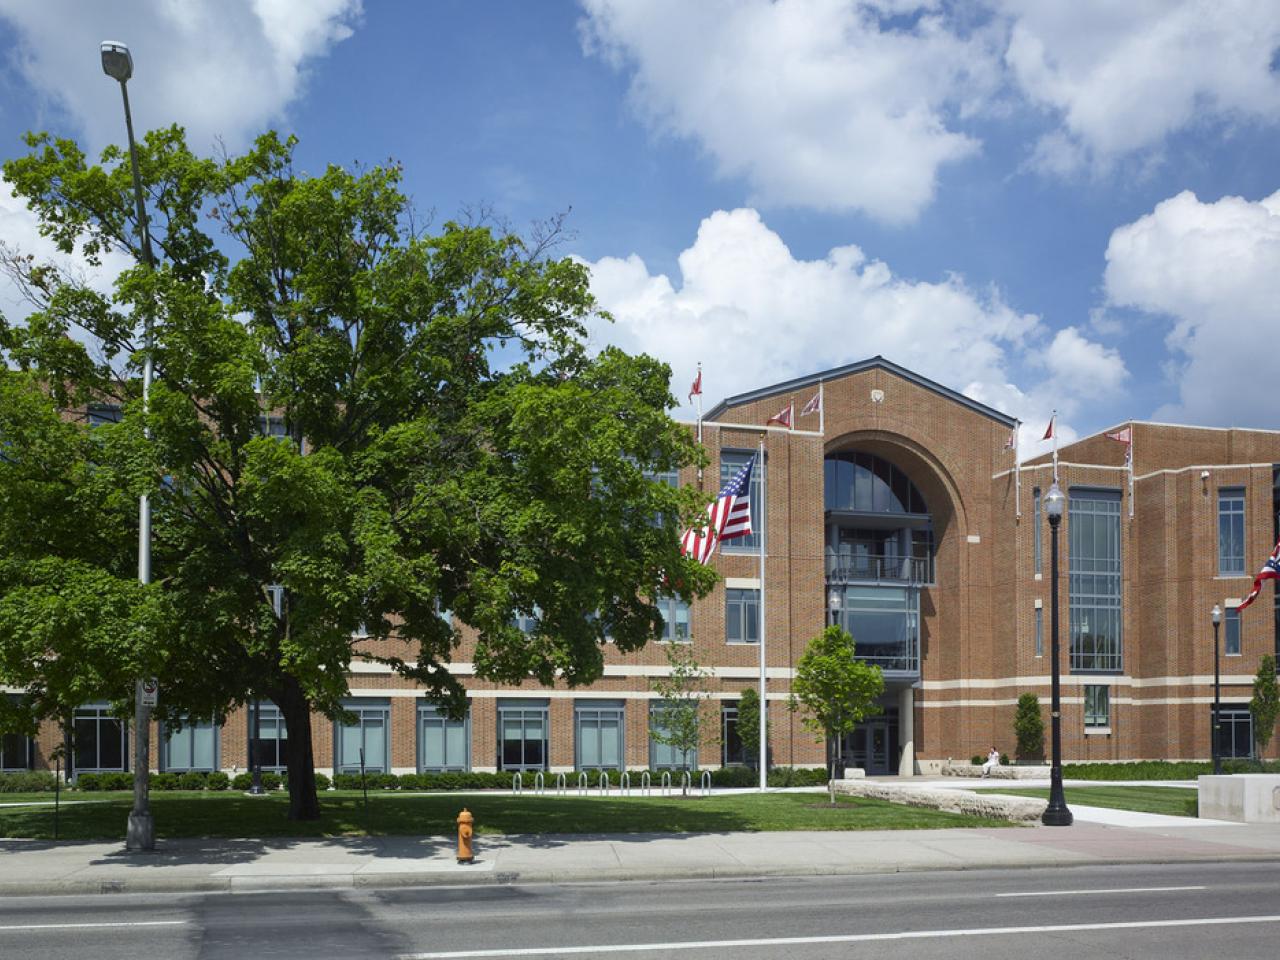 Ohio Union Building with 85,000 sqare feet for rent for large conferences and events